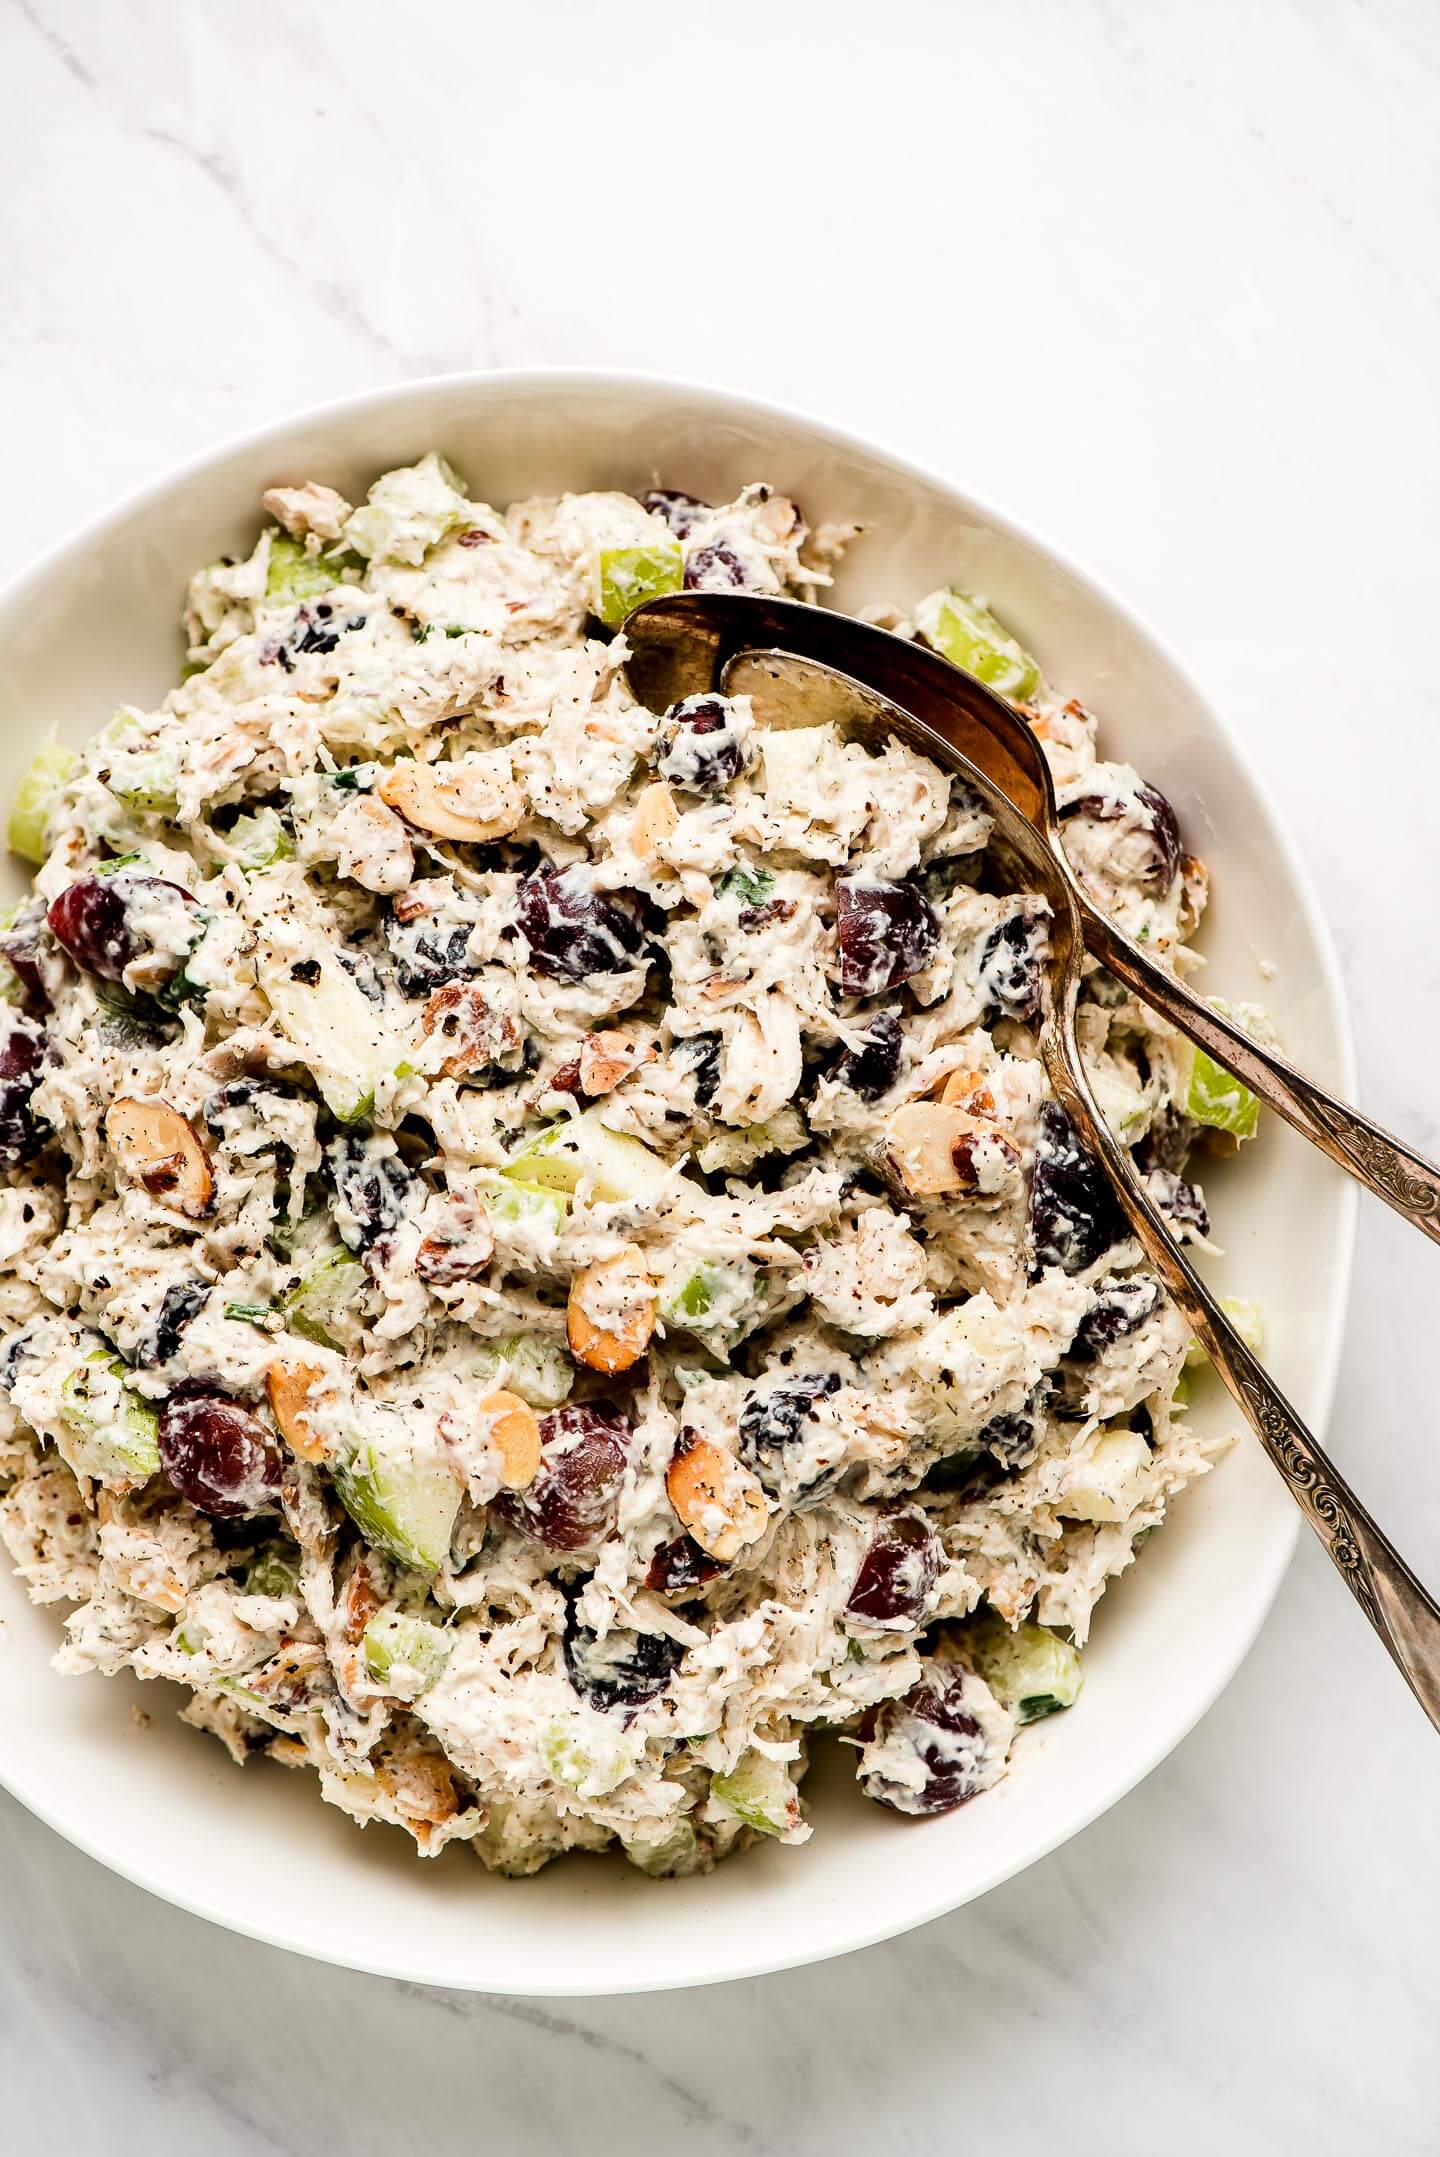 A white bowl of a mix of shredded chicken, apples, grapes, almonds, raisins and celery.